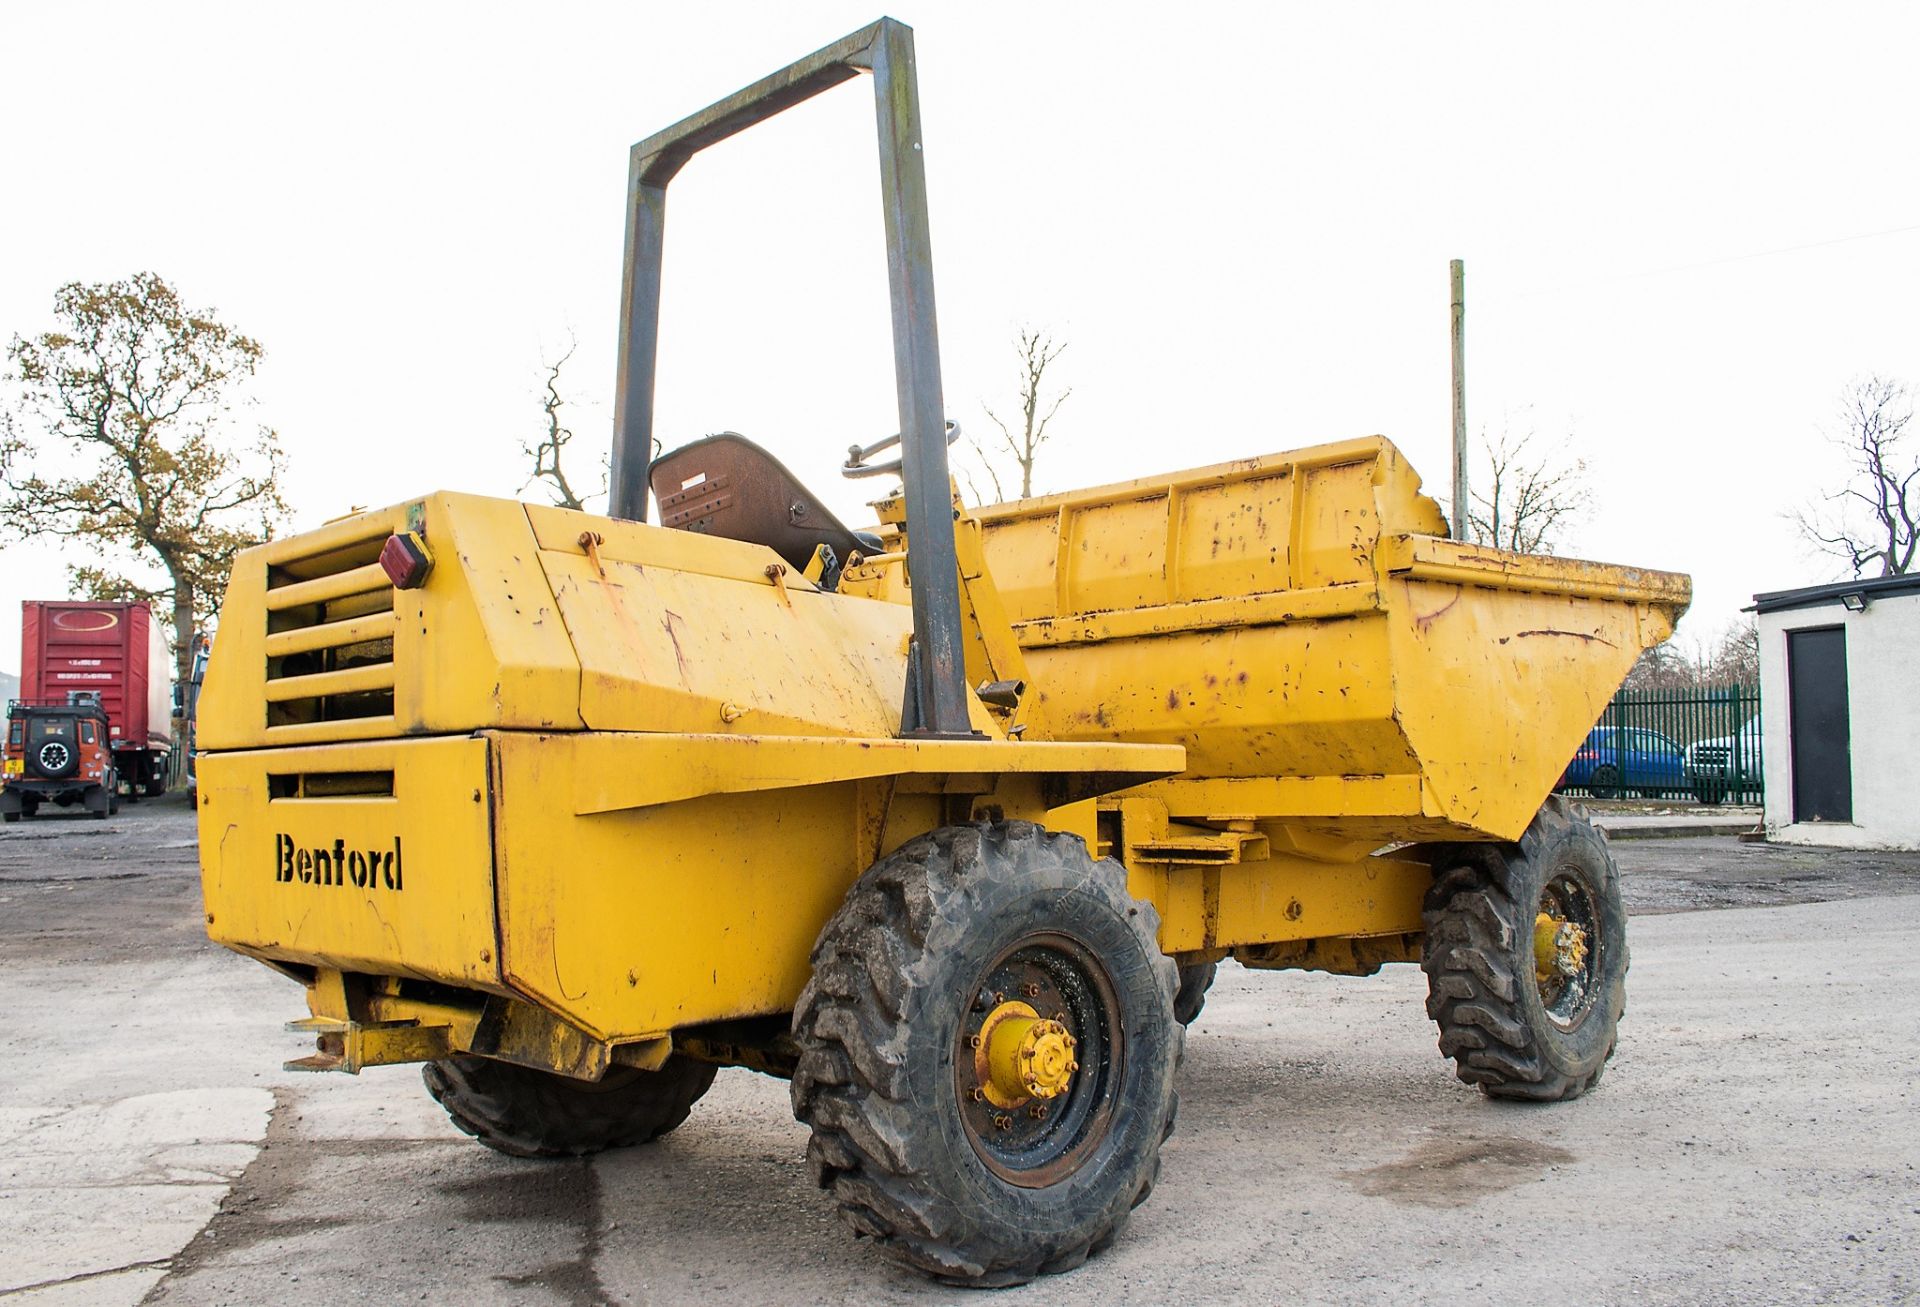 Benford Terex 5 tonne straight skip dumper S/N: A446 Recorded Hours: Not displayed (Clock blank) - Image 4 of 16